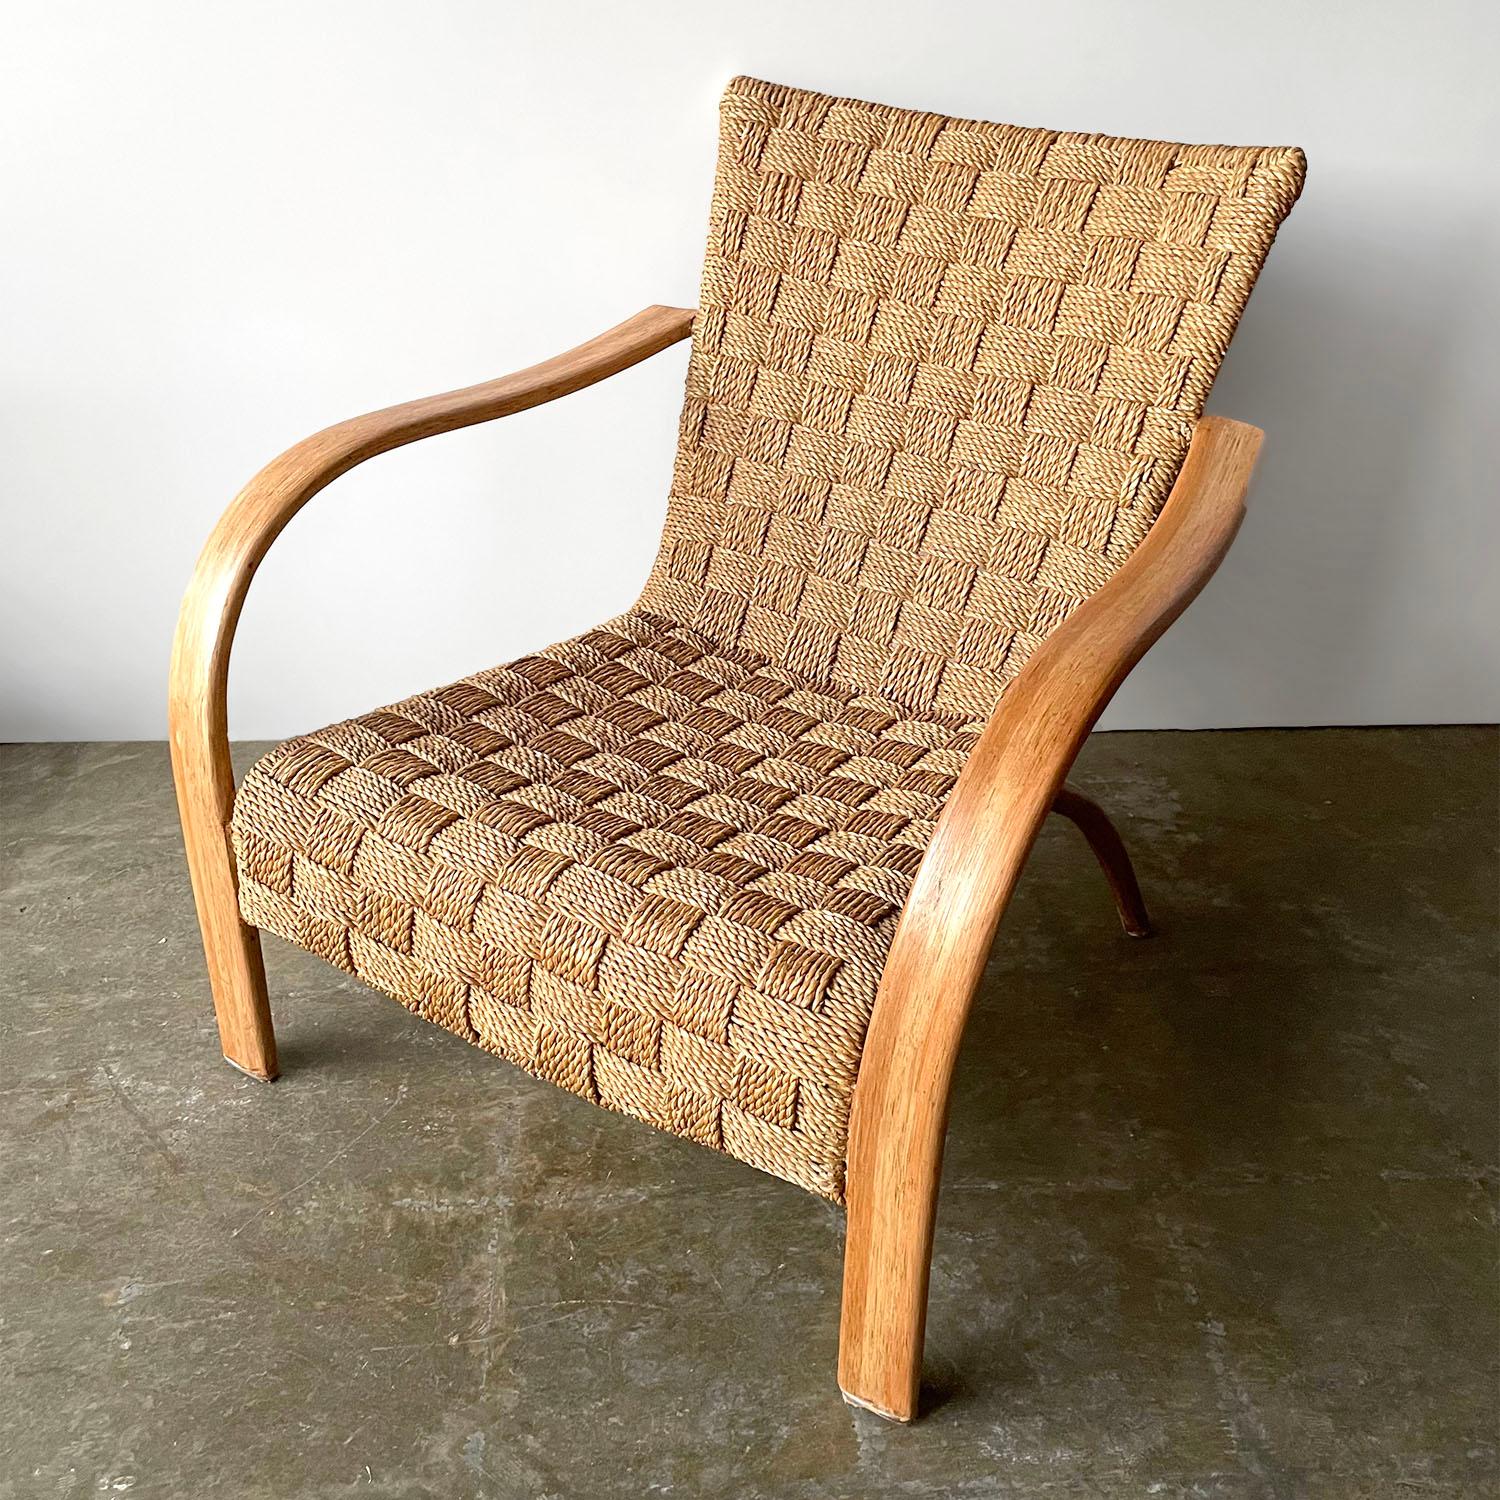 Oversized bentwood braided rope arm chair
Mid century sculptural gem
Braided cross stitched rope chair
Sculptural bentwood arms and legs
Natural color variations throughout
Patina from age and use
Newly reconditioned

This is the perfect chair for